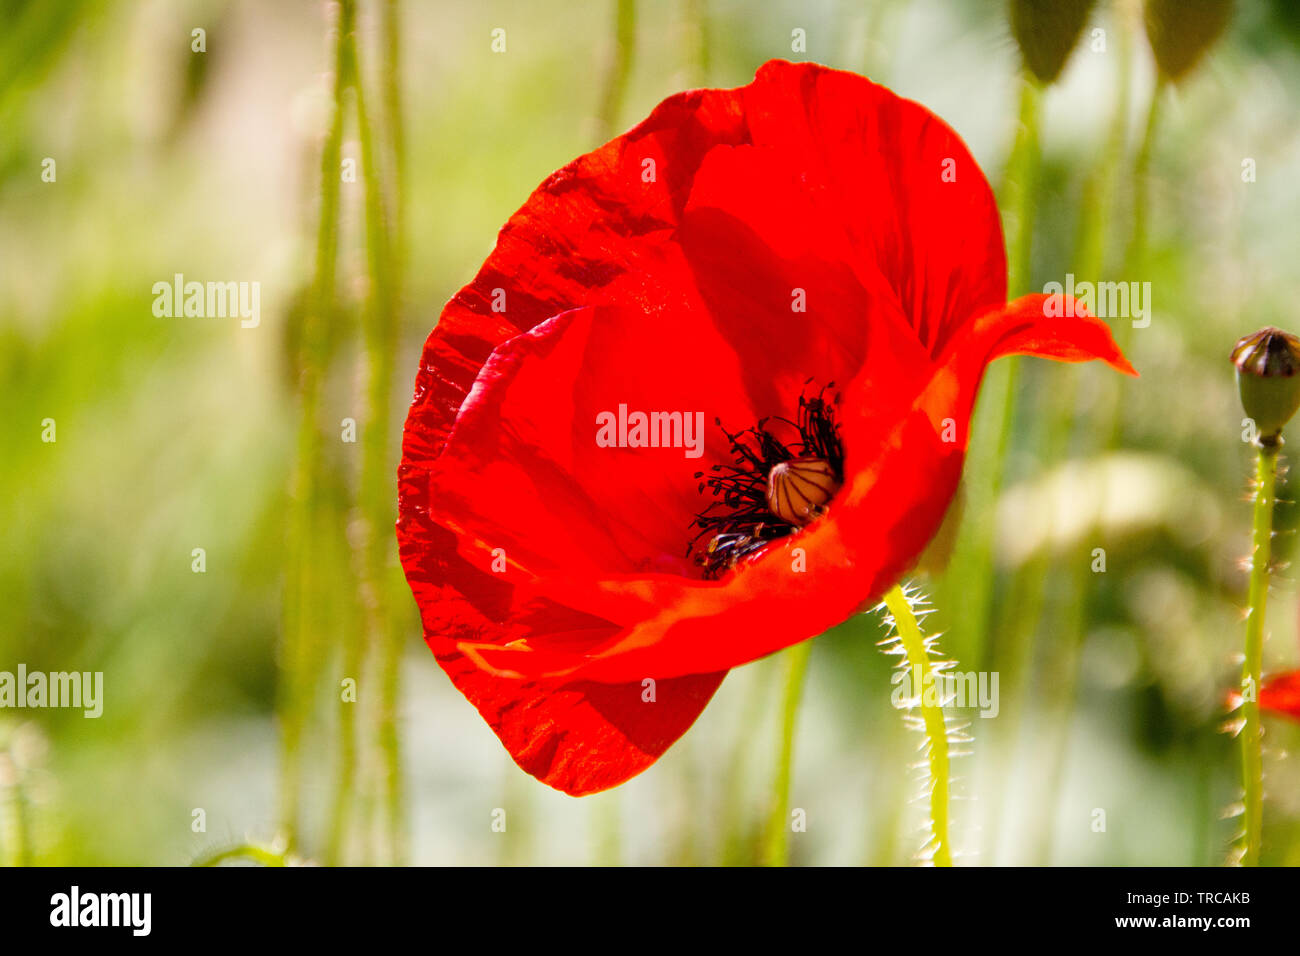 Close up of the red Common Poppy (Papaver rhoeas), of the poppy family Papaveraceae. The poppy is also a symbol of dead soldiers since World War 1. Se Stock Photo